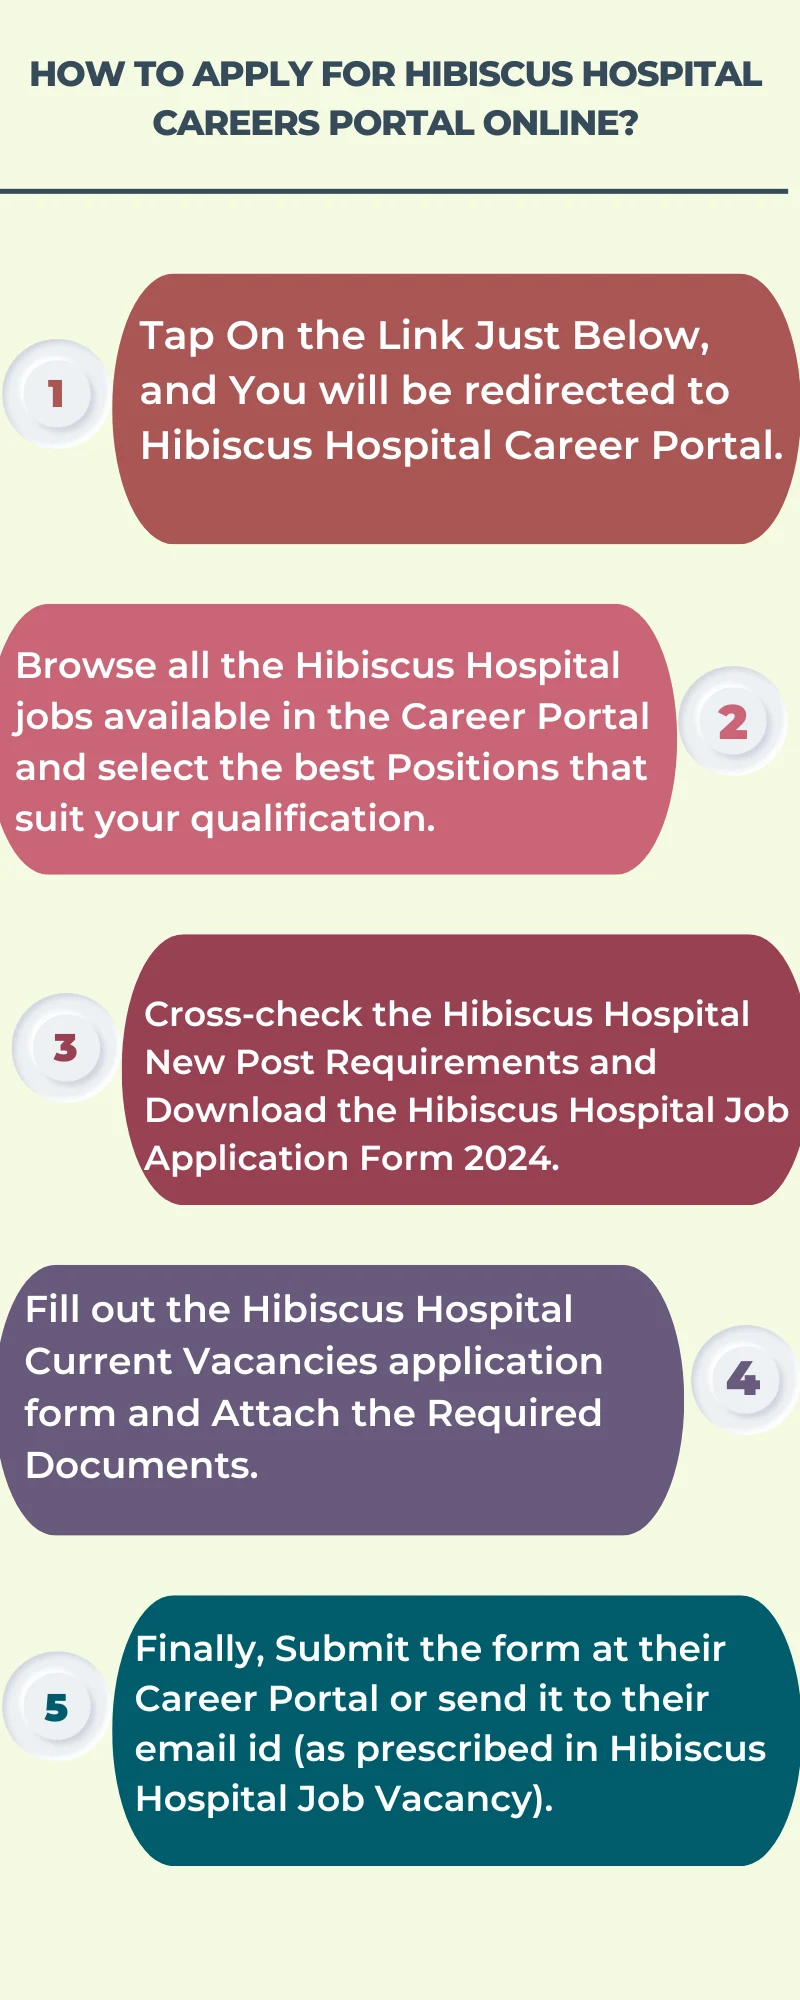 How To Apply for Hibiscus Hospital Careers Portal Online?